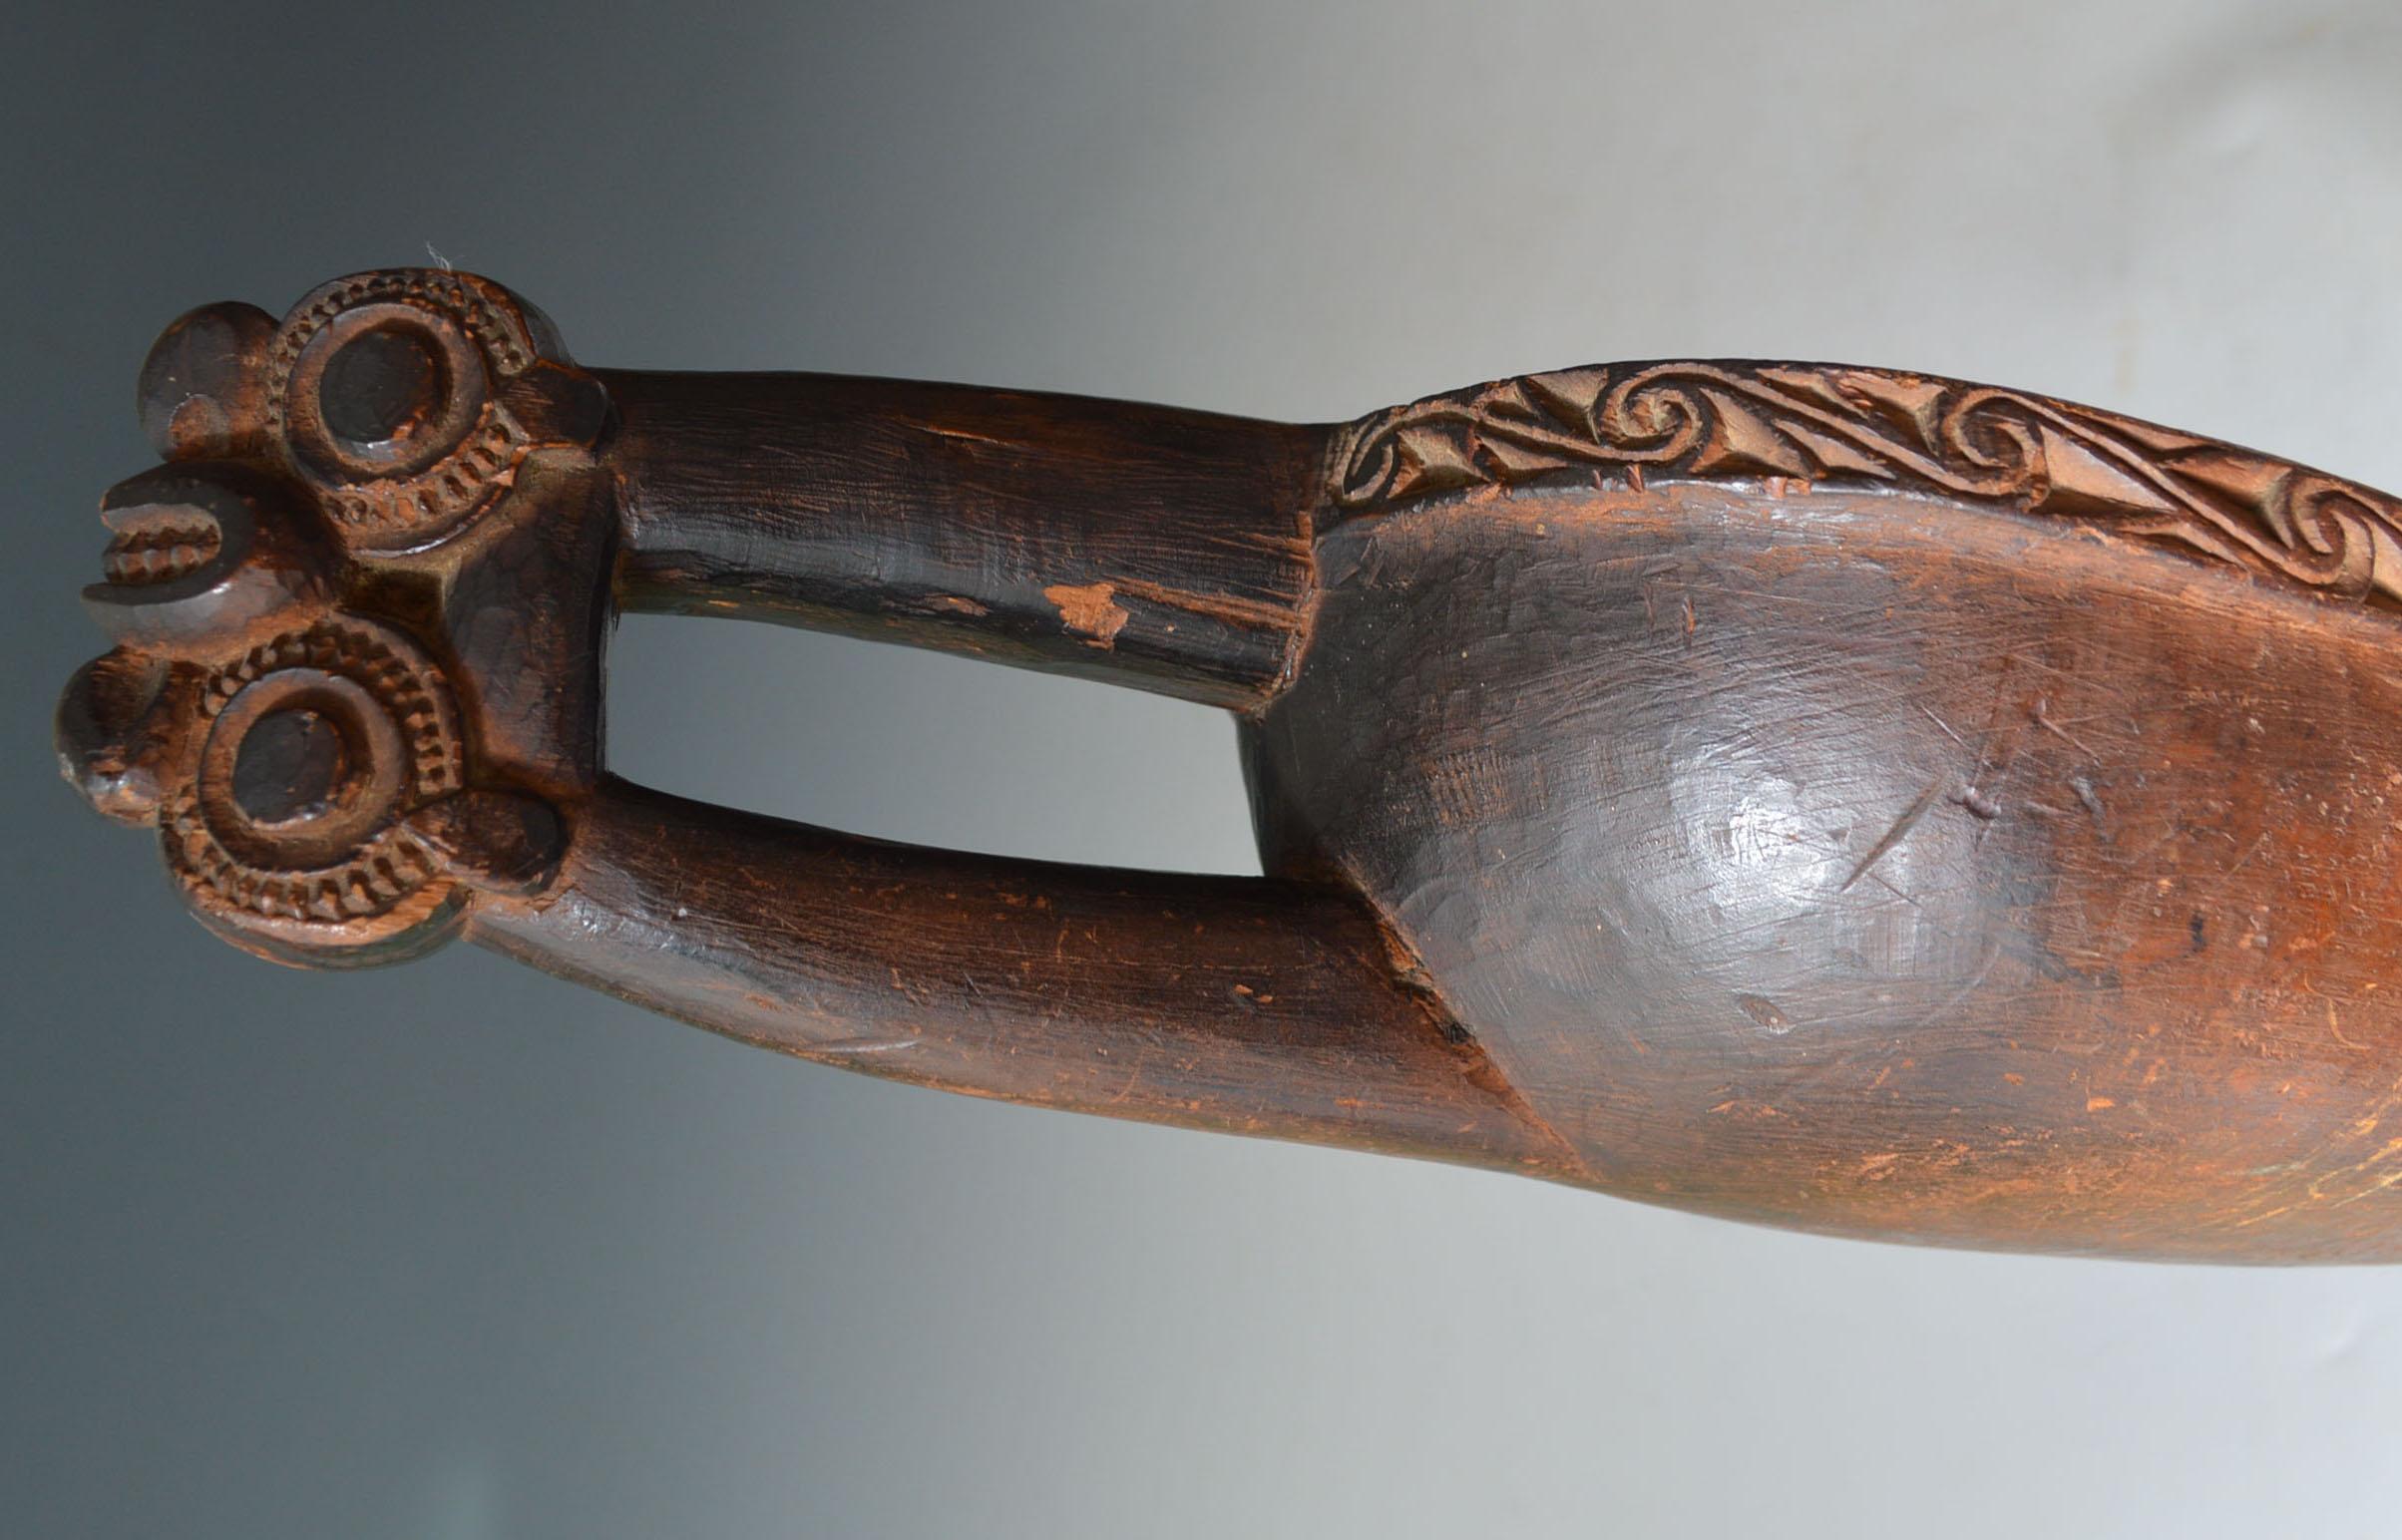 A Very rare and finely carved Maori canoe bailer 
Carved with double Tiki heads from a outward protruding double neck handle
A very rare and finely carved Maori canoe bailer
Carved with double Tiki heads from an outward protruding double neck